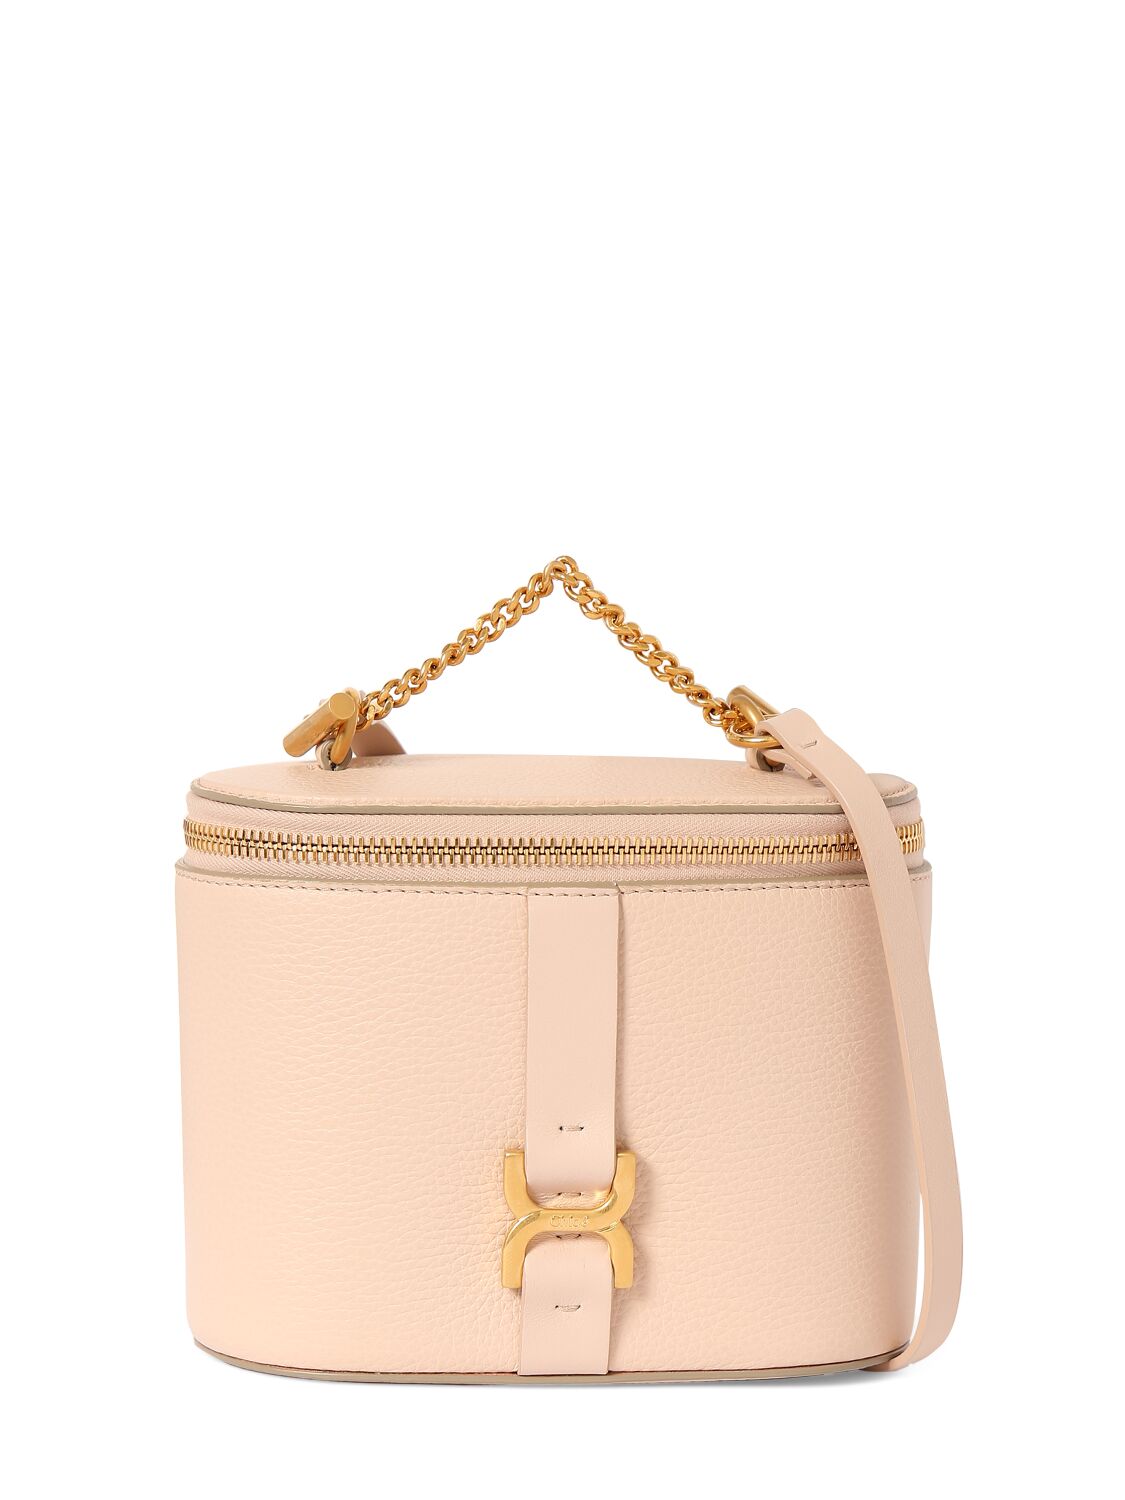 Chloé Marcie Constructed Leather Shoulder Bag In Cement Pink